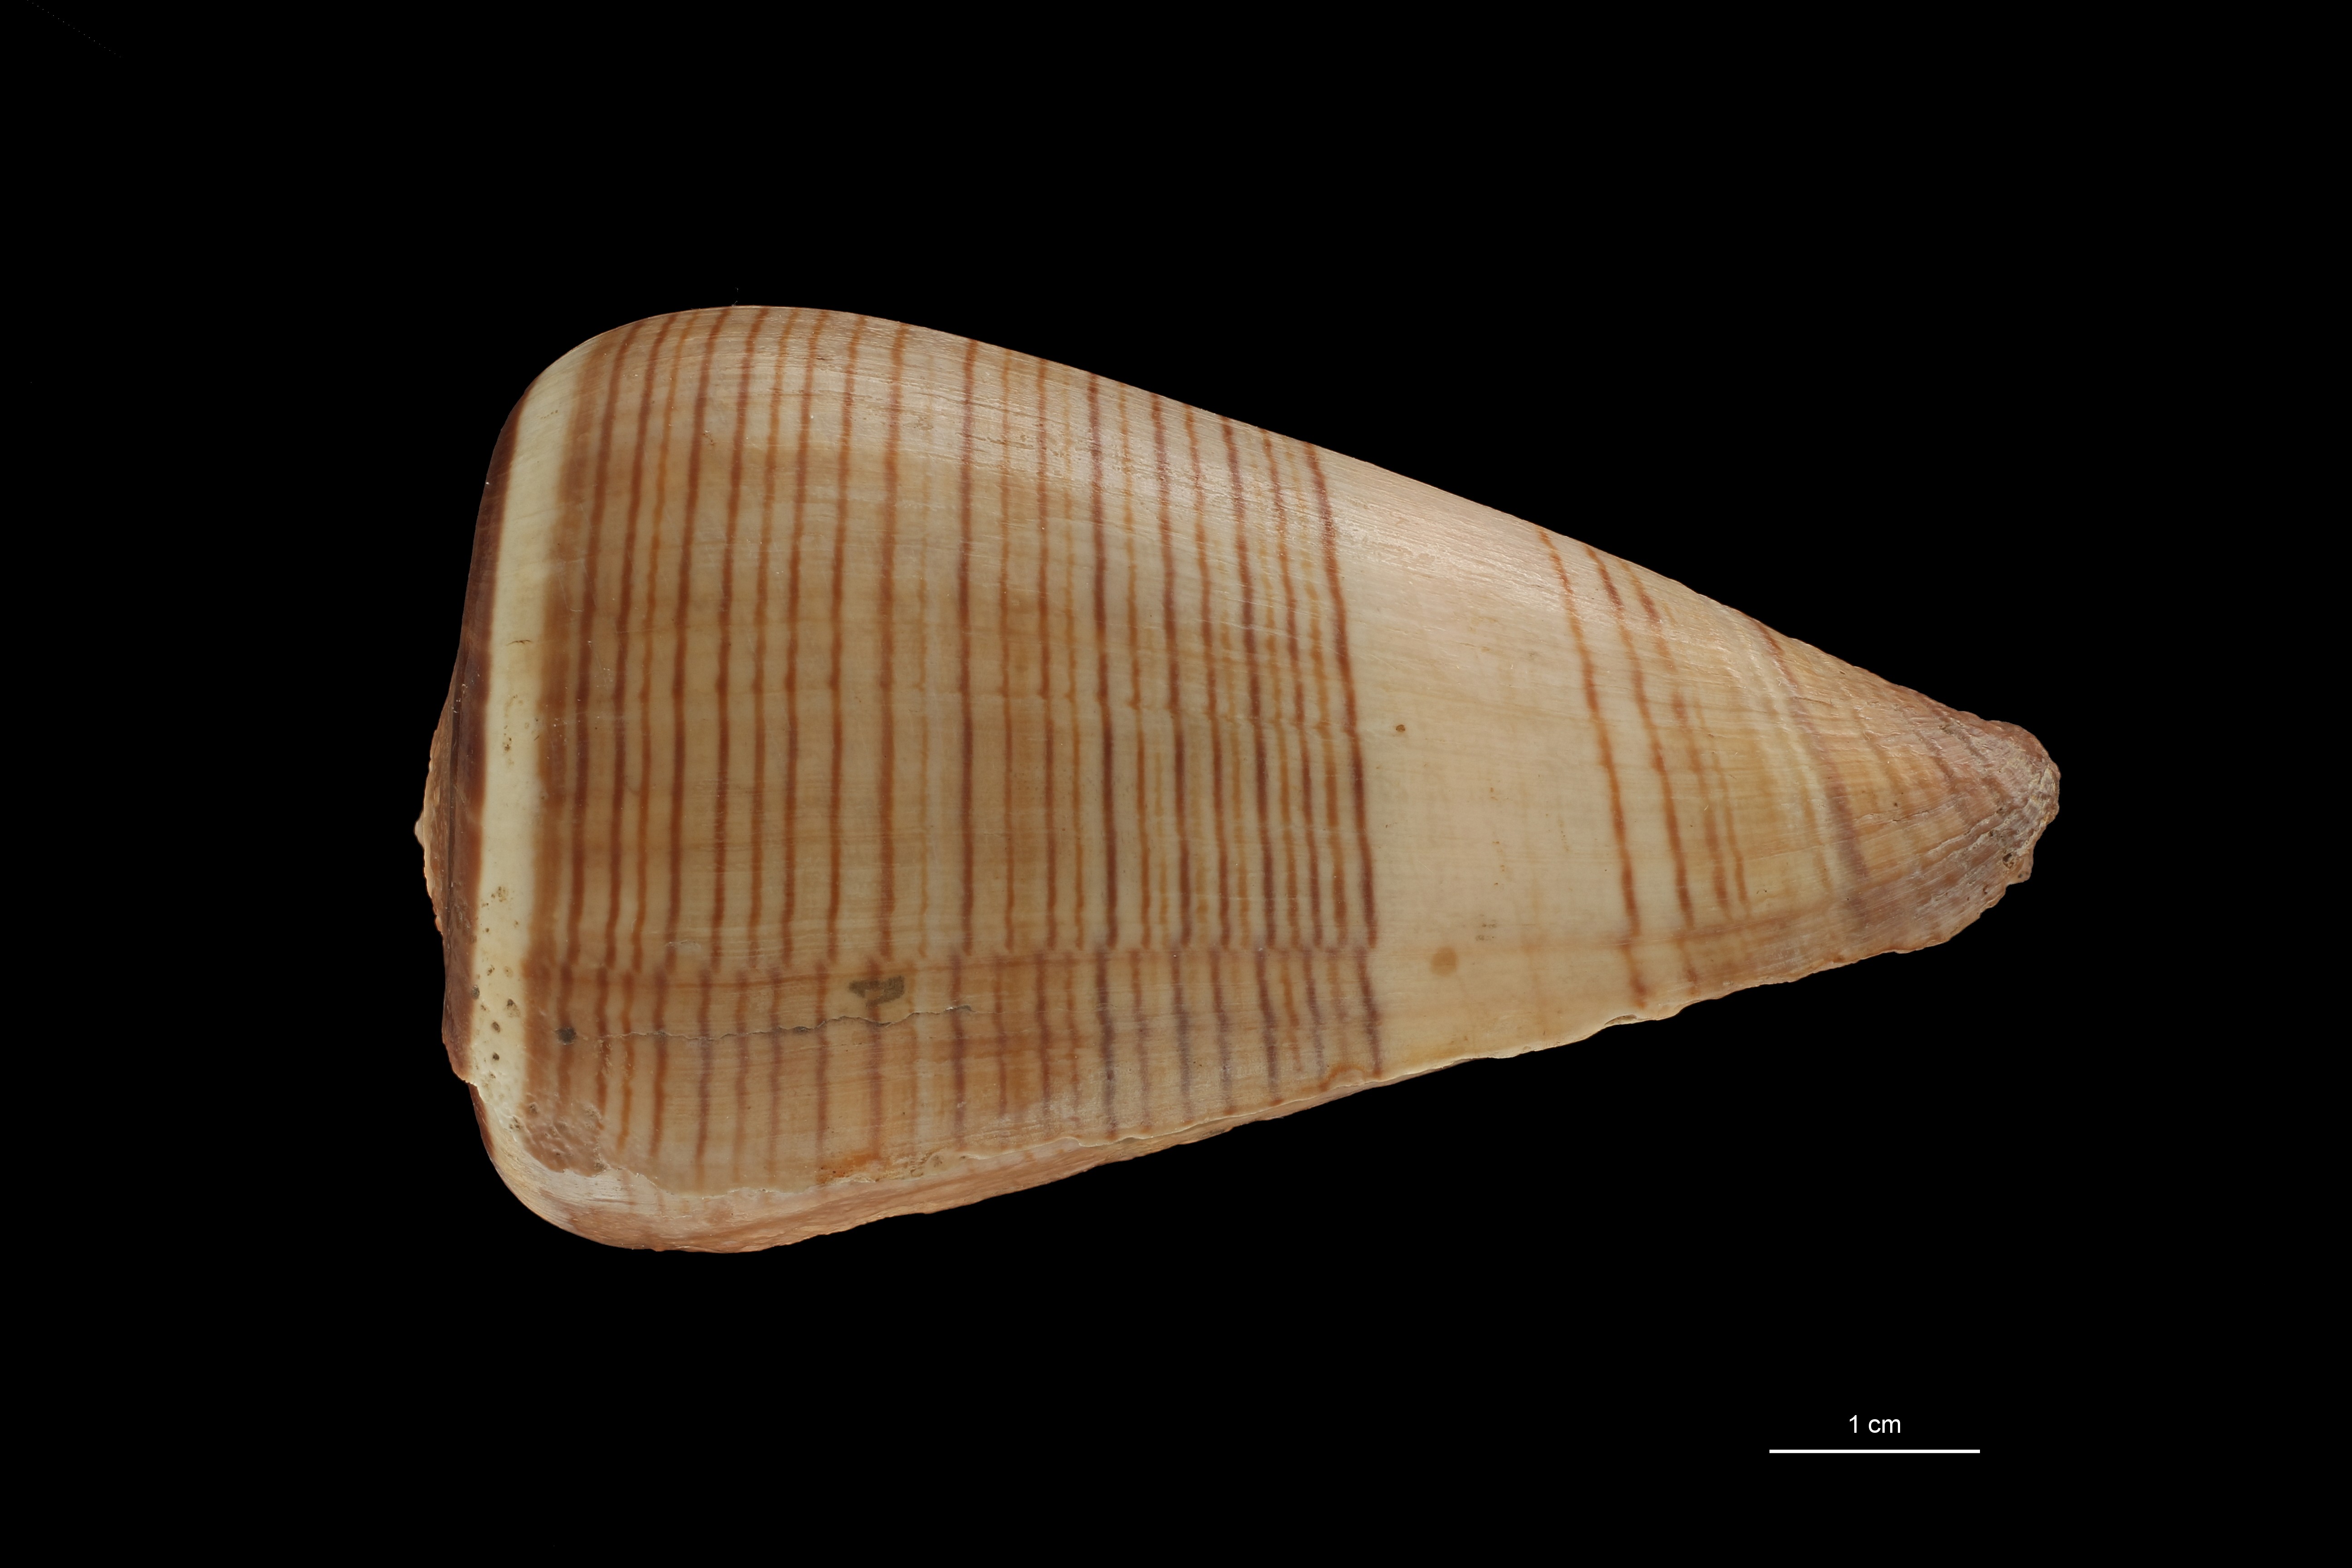 BE-RBINS-INV HOLOTYPE MT.2532 Conus figulinus var. insignis LATERAL ZS PMax Scaled.jpg